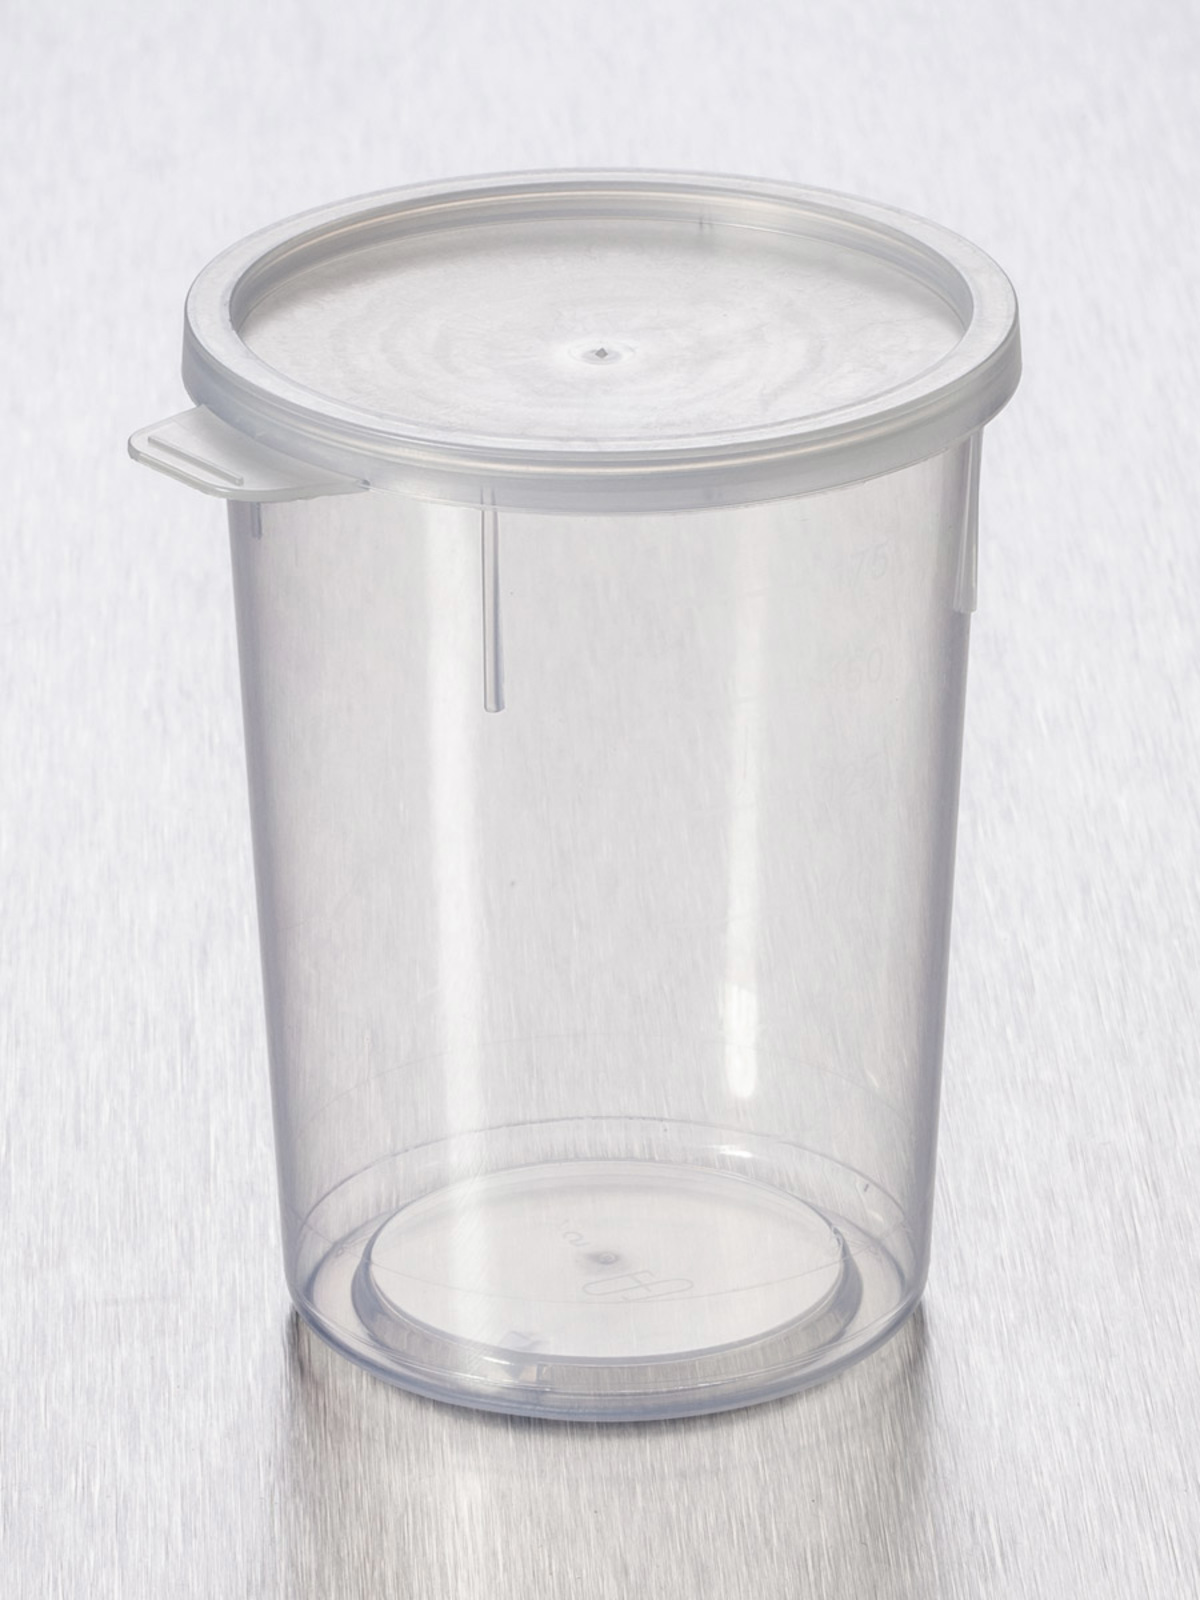 Sample containers, snap-seal, Corning®